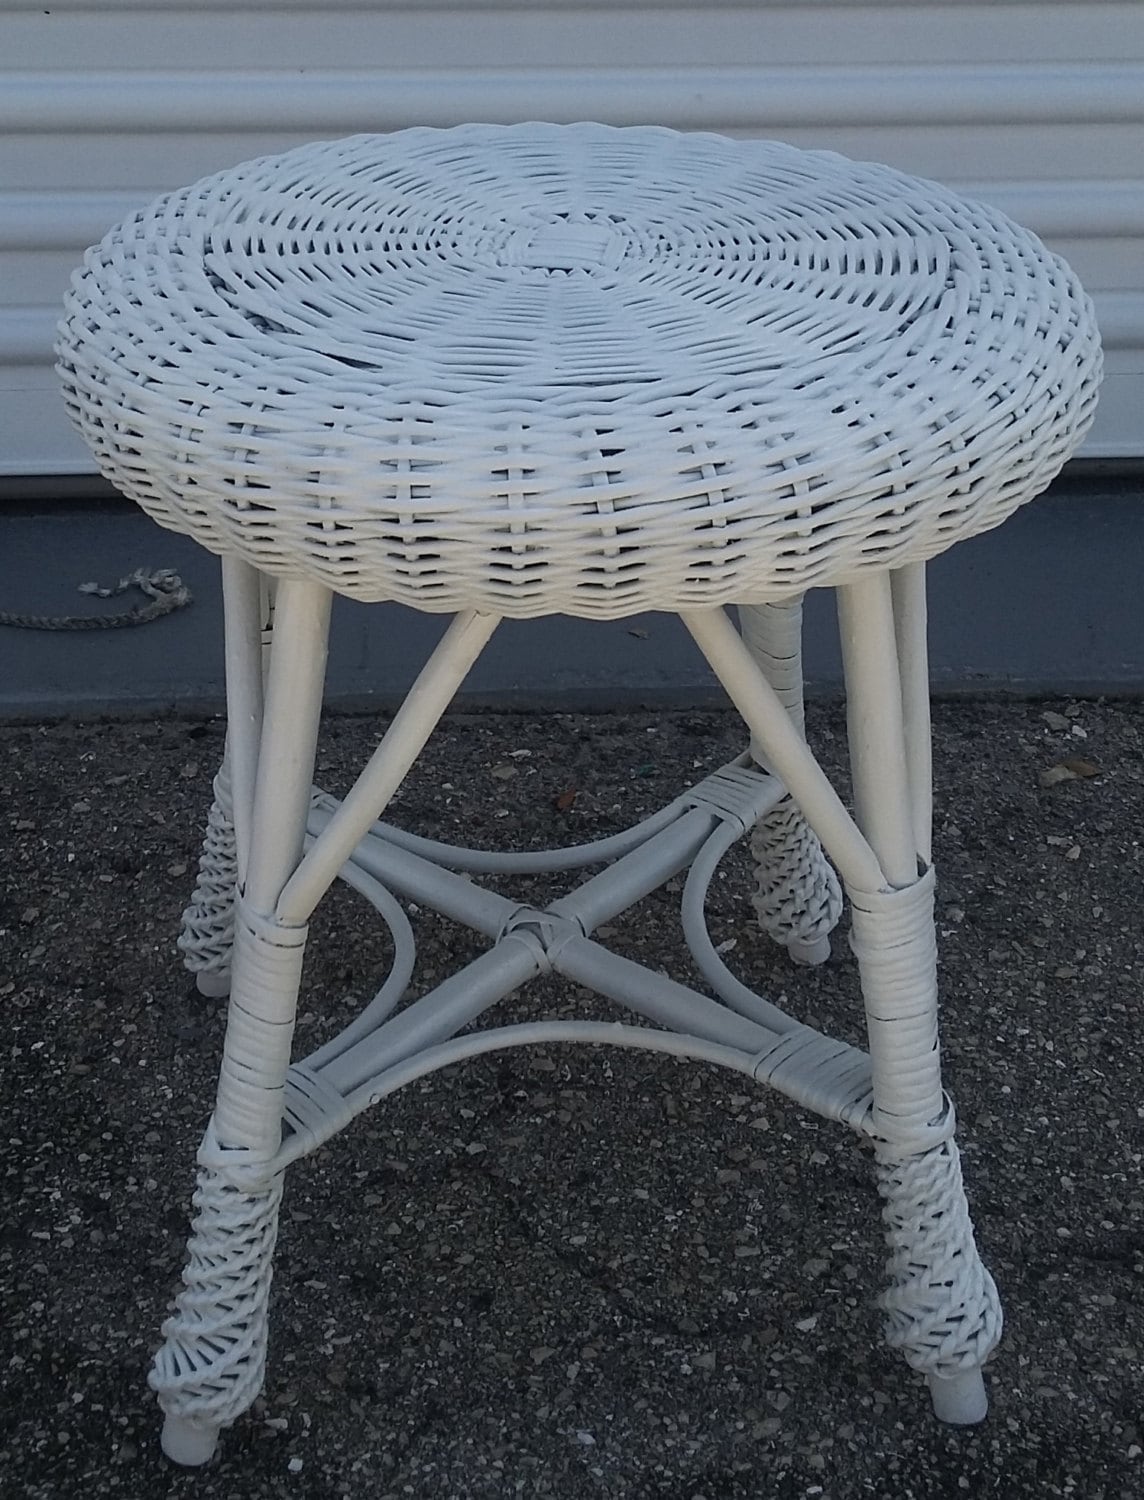 White Wicker Rattan Woven Stool Bamboo Mid Century Small Foot Ottoman Plant Stand Patio Furniture